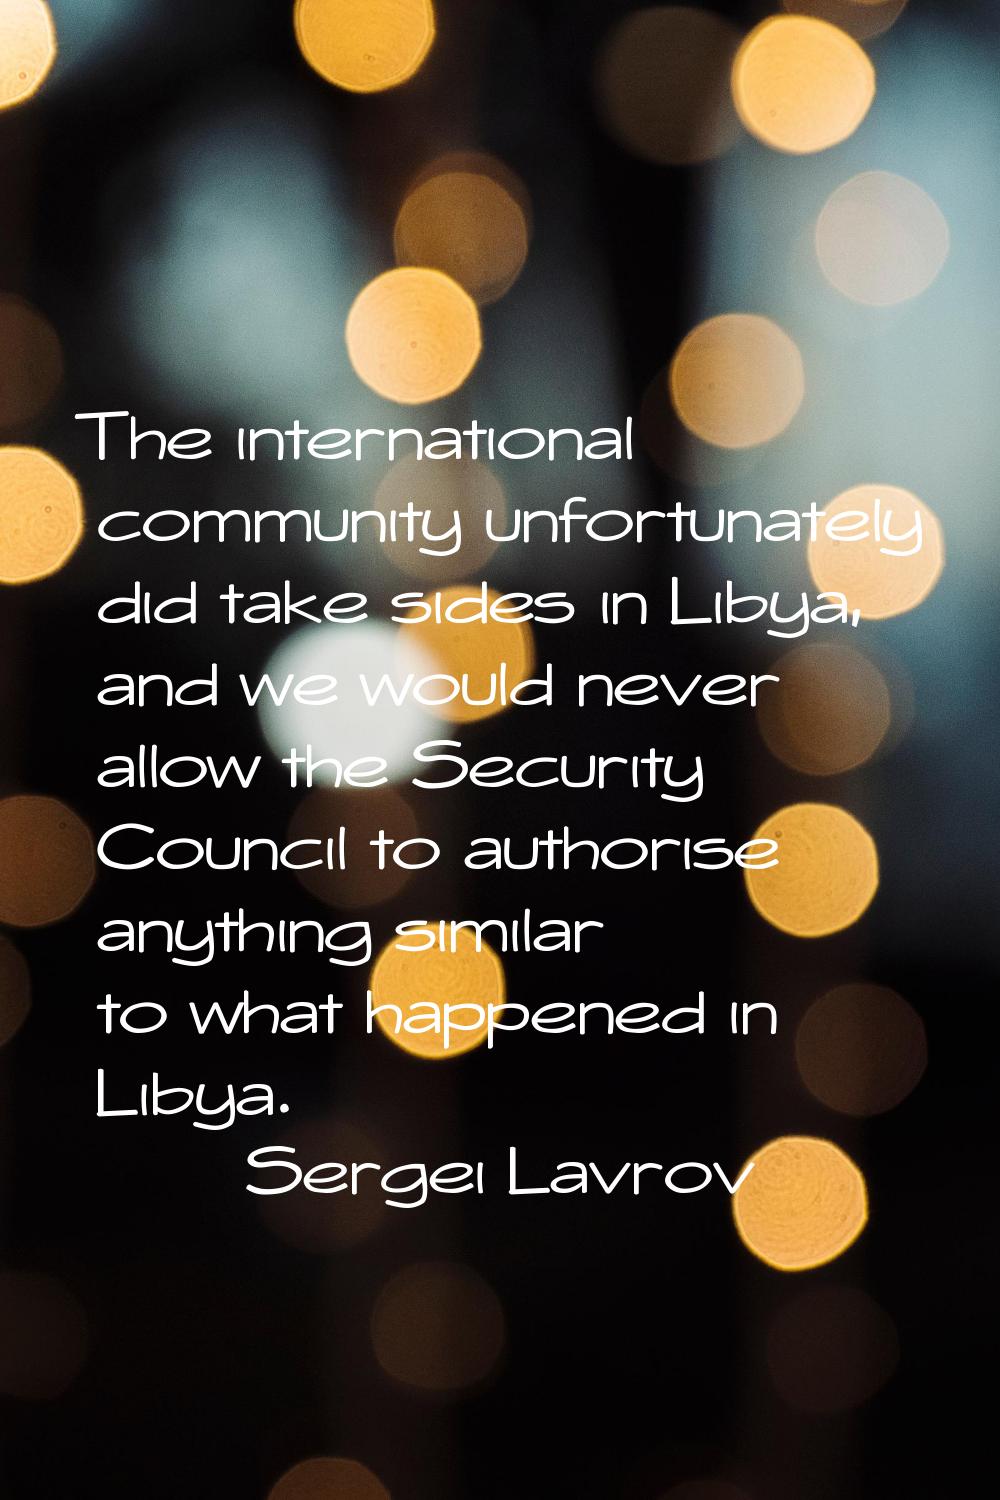 The international community unfortunately did take sides in Libya, and we would never allow the Sec